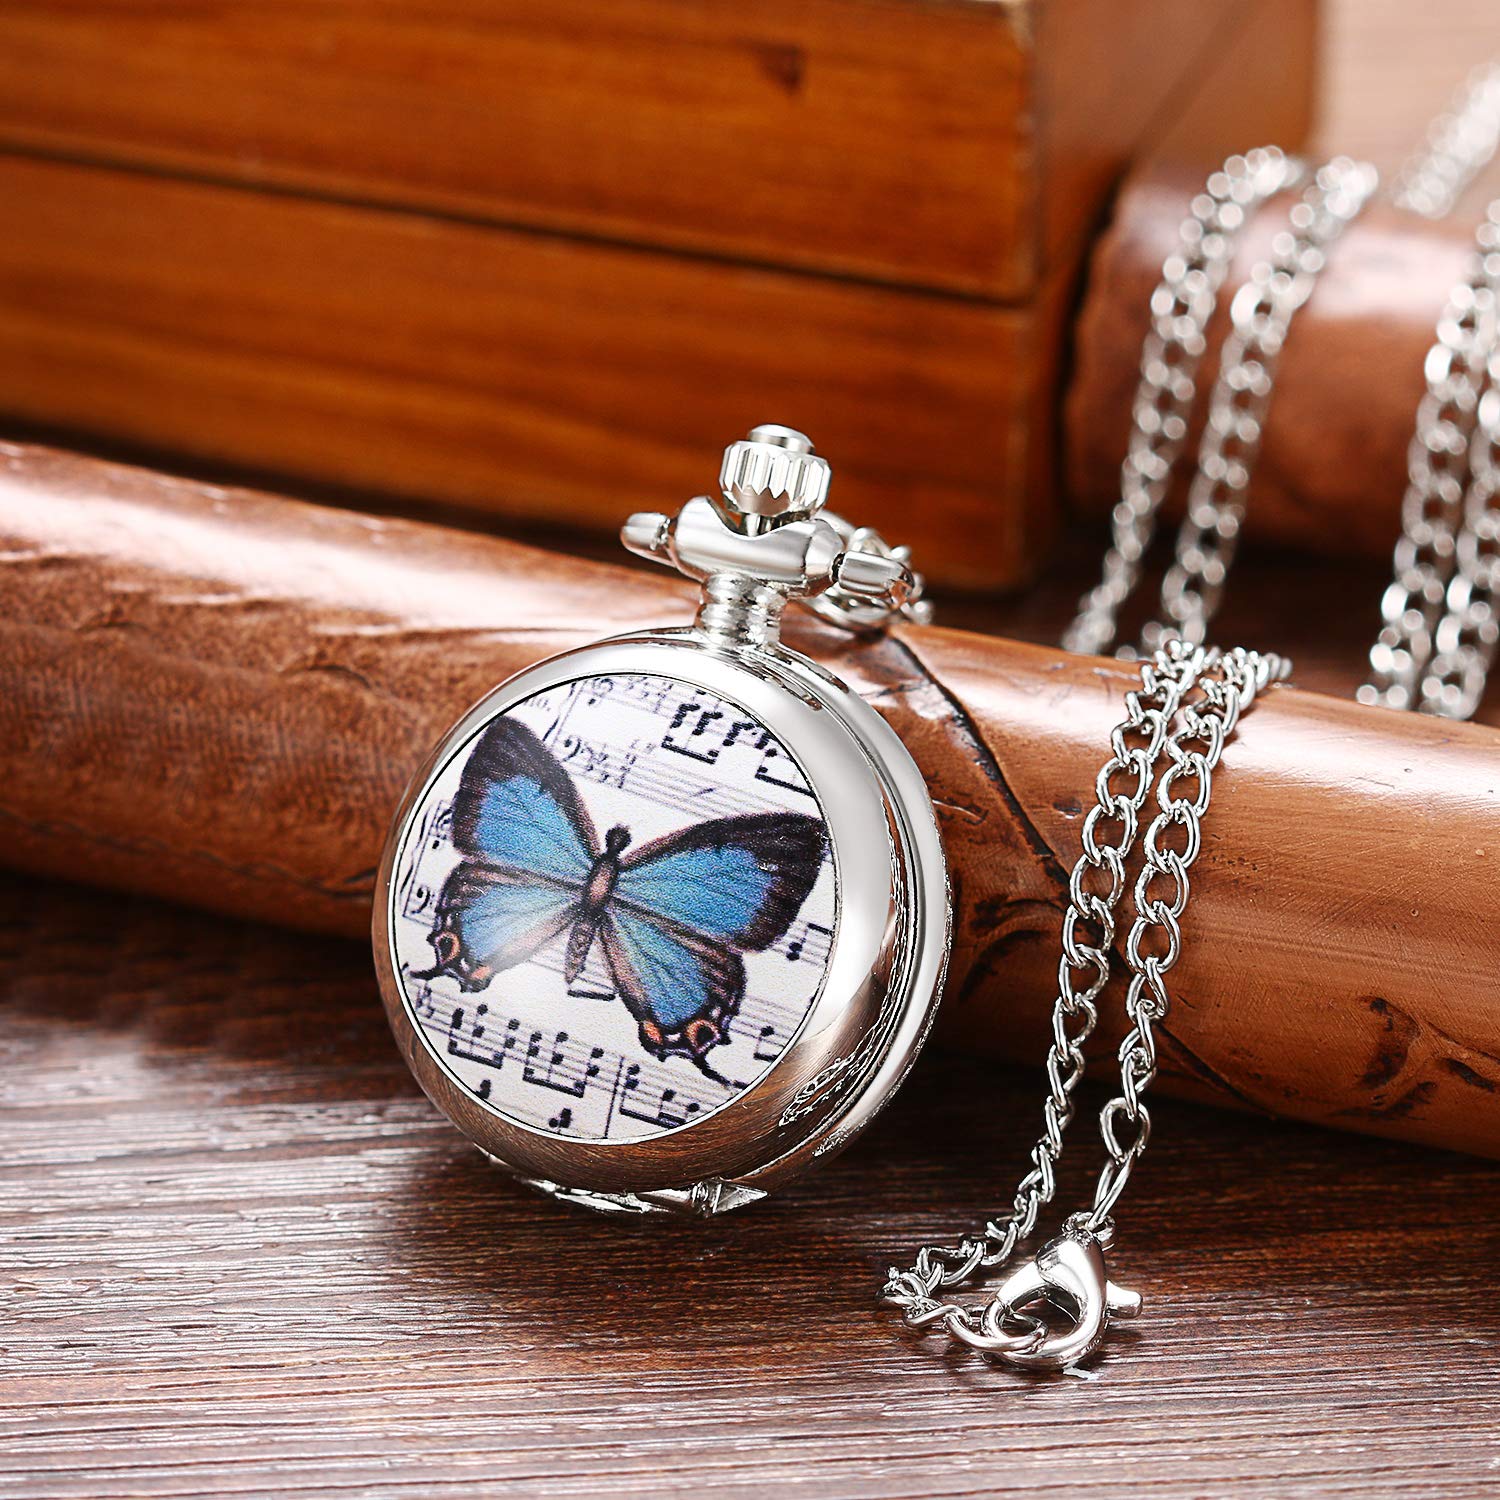 Lancardo Women Pocket Watch Beautiful Butterfly Silver Quartz Sweater Necklace with Chain Pendant Watch for Mother